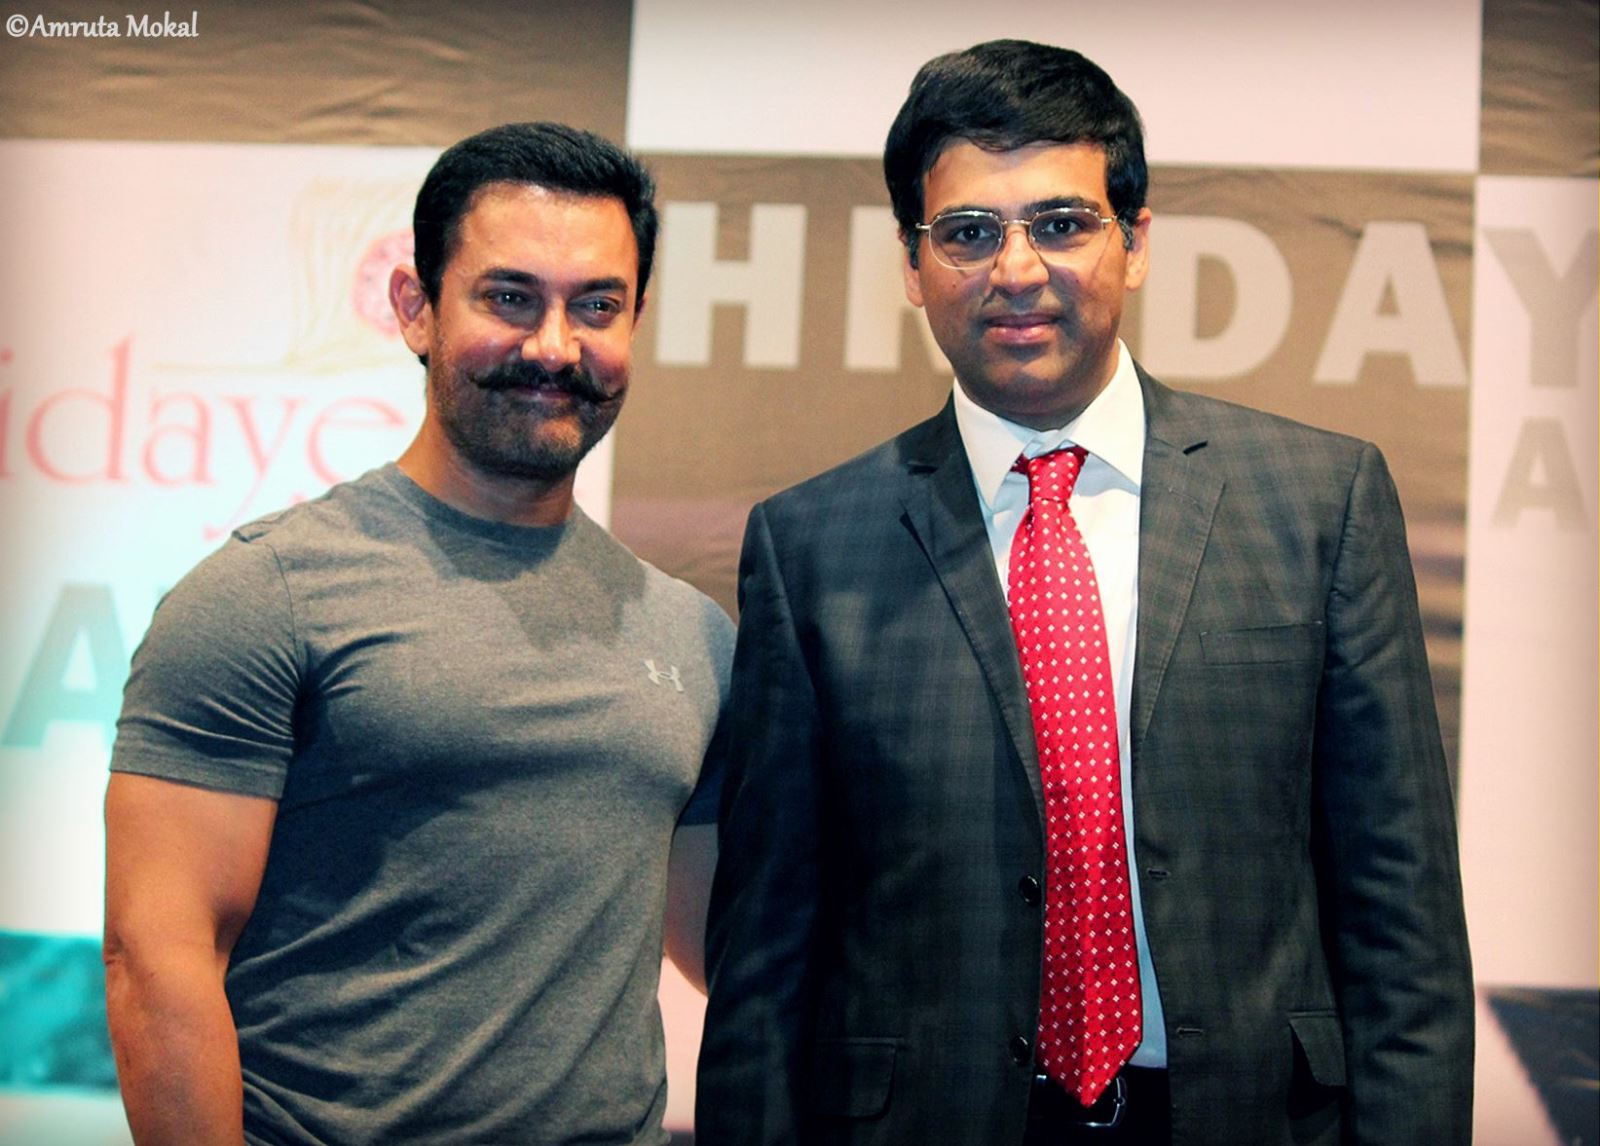 Aamir Khan with Anand